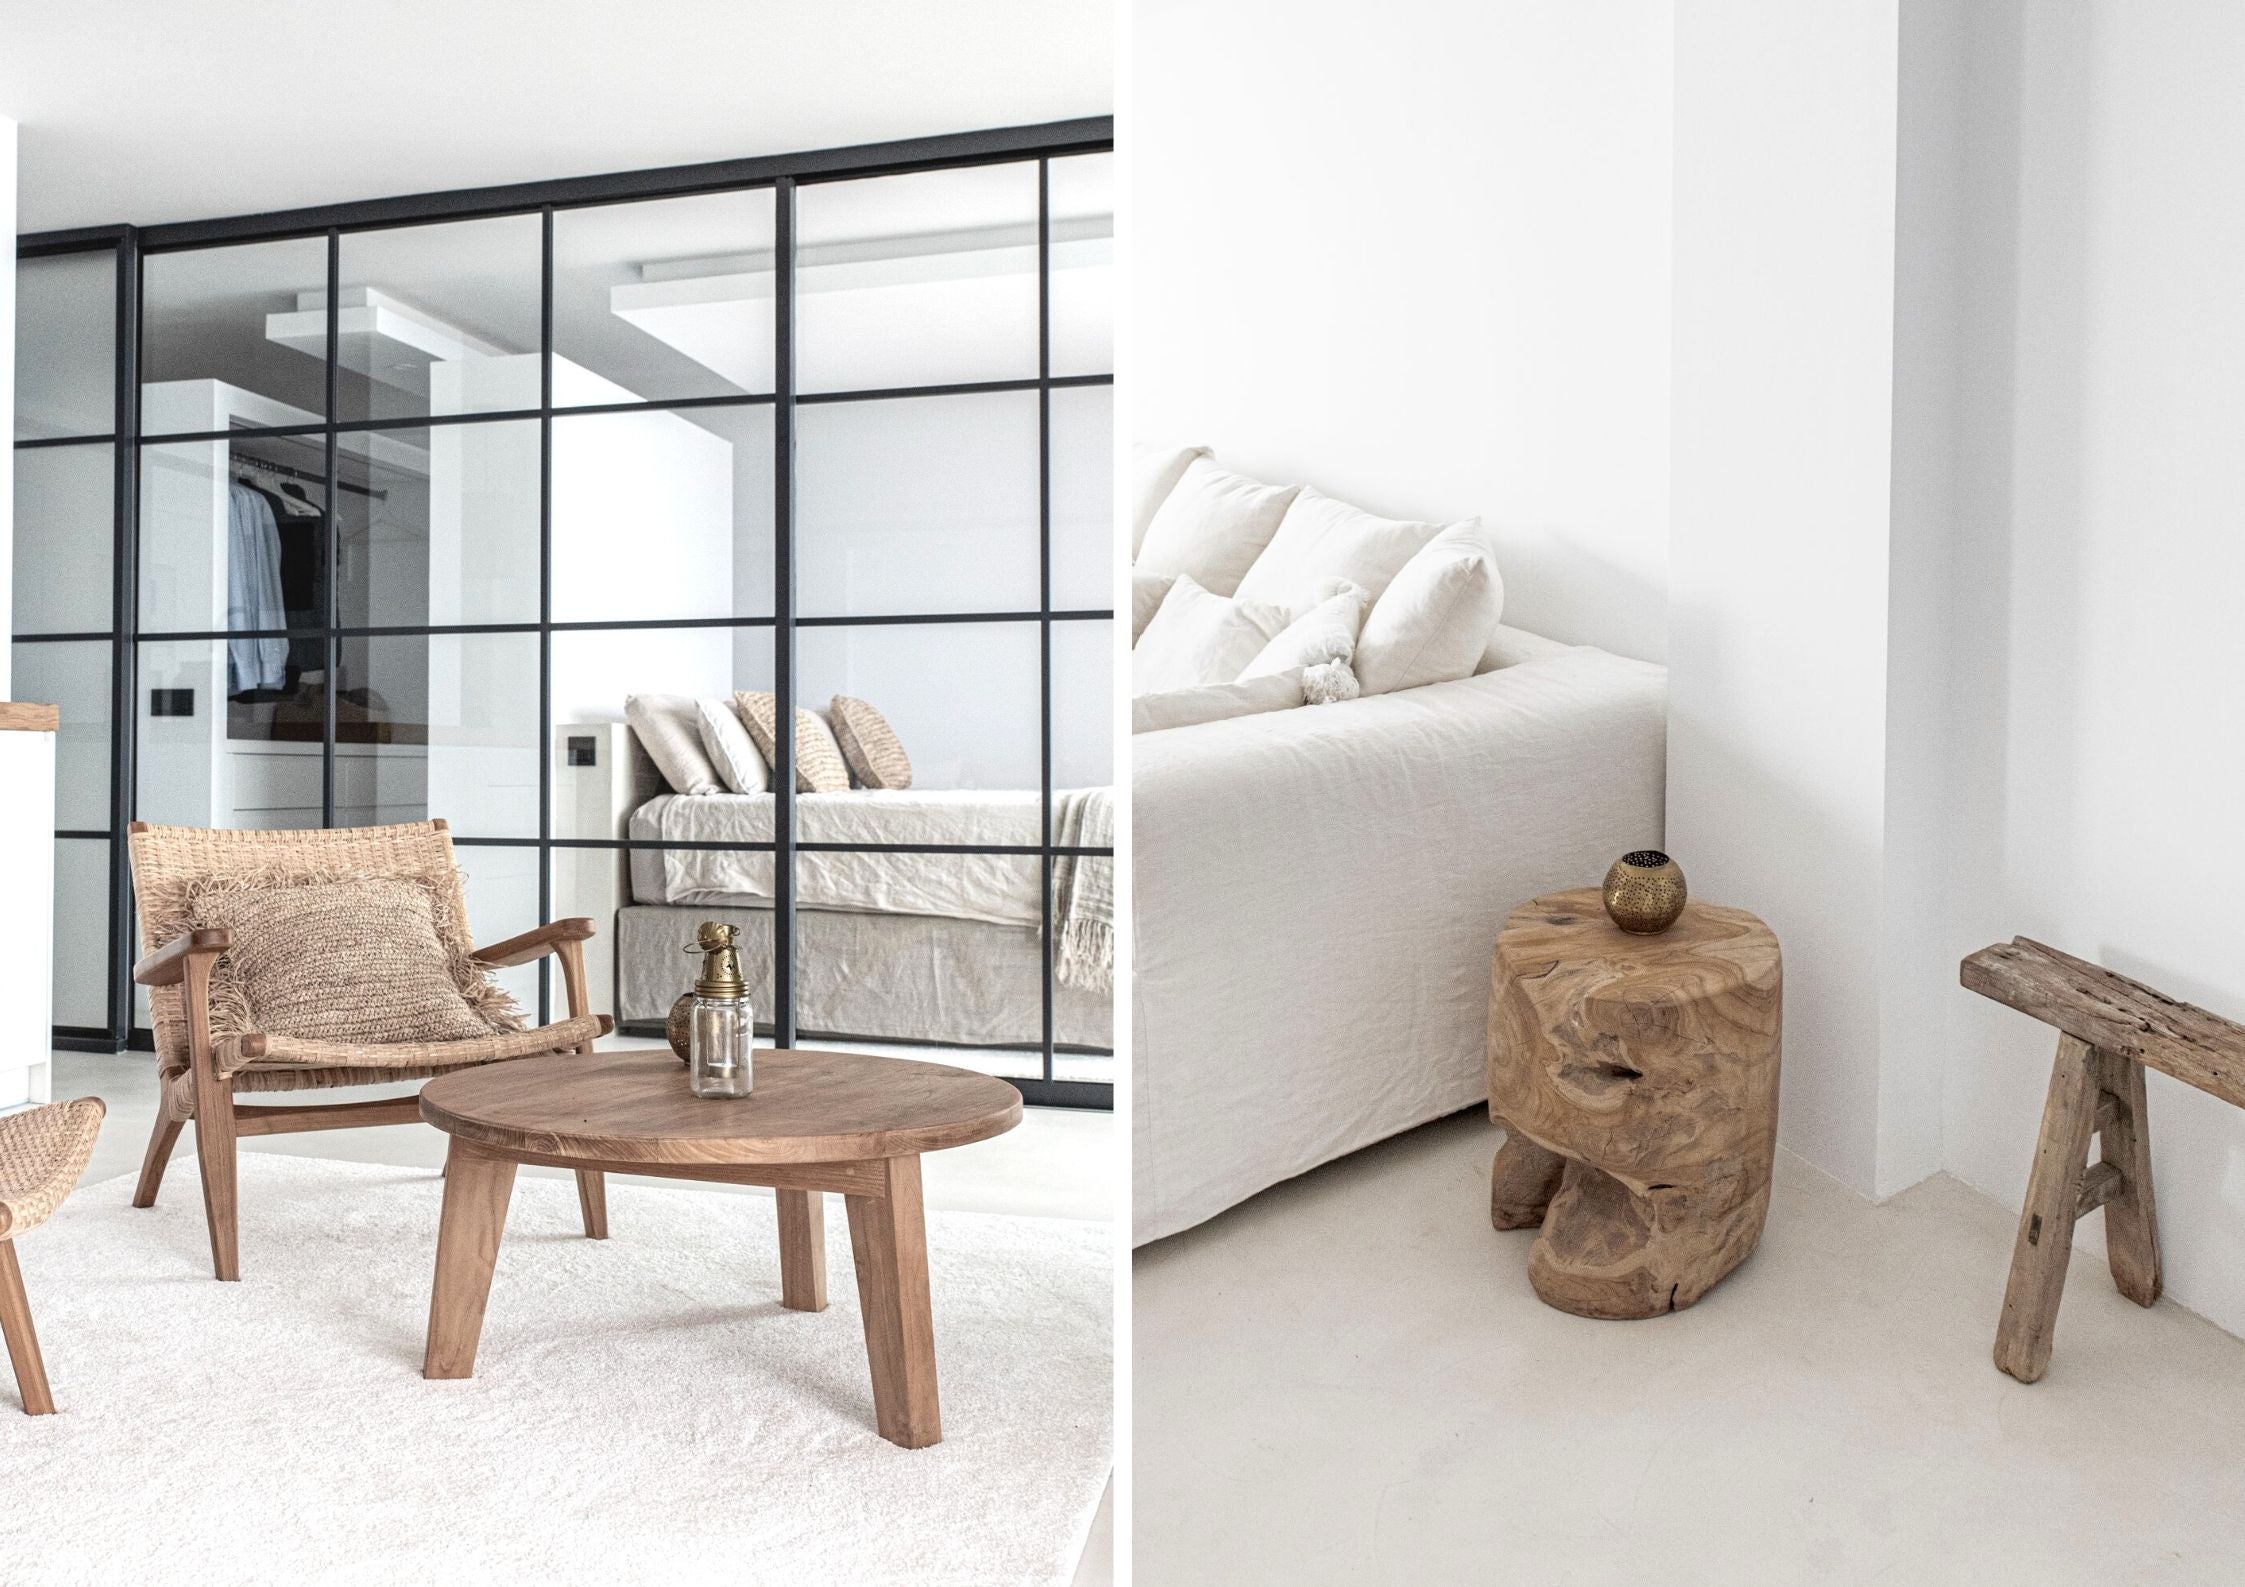 Zoco Home Bring natural textures into home living room